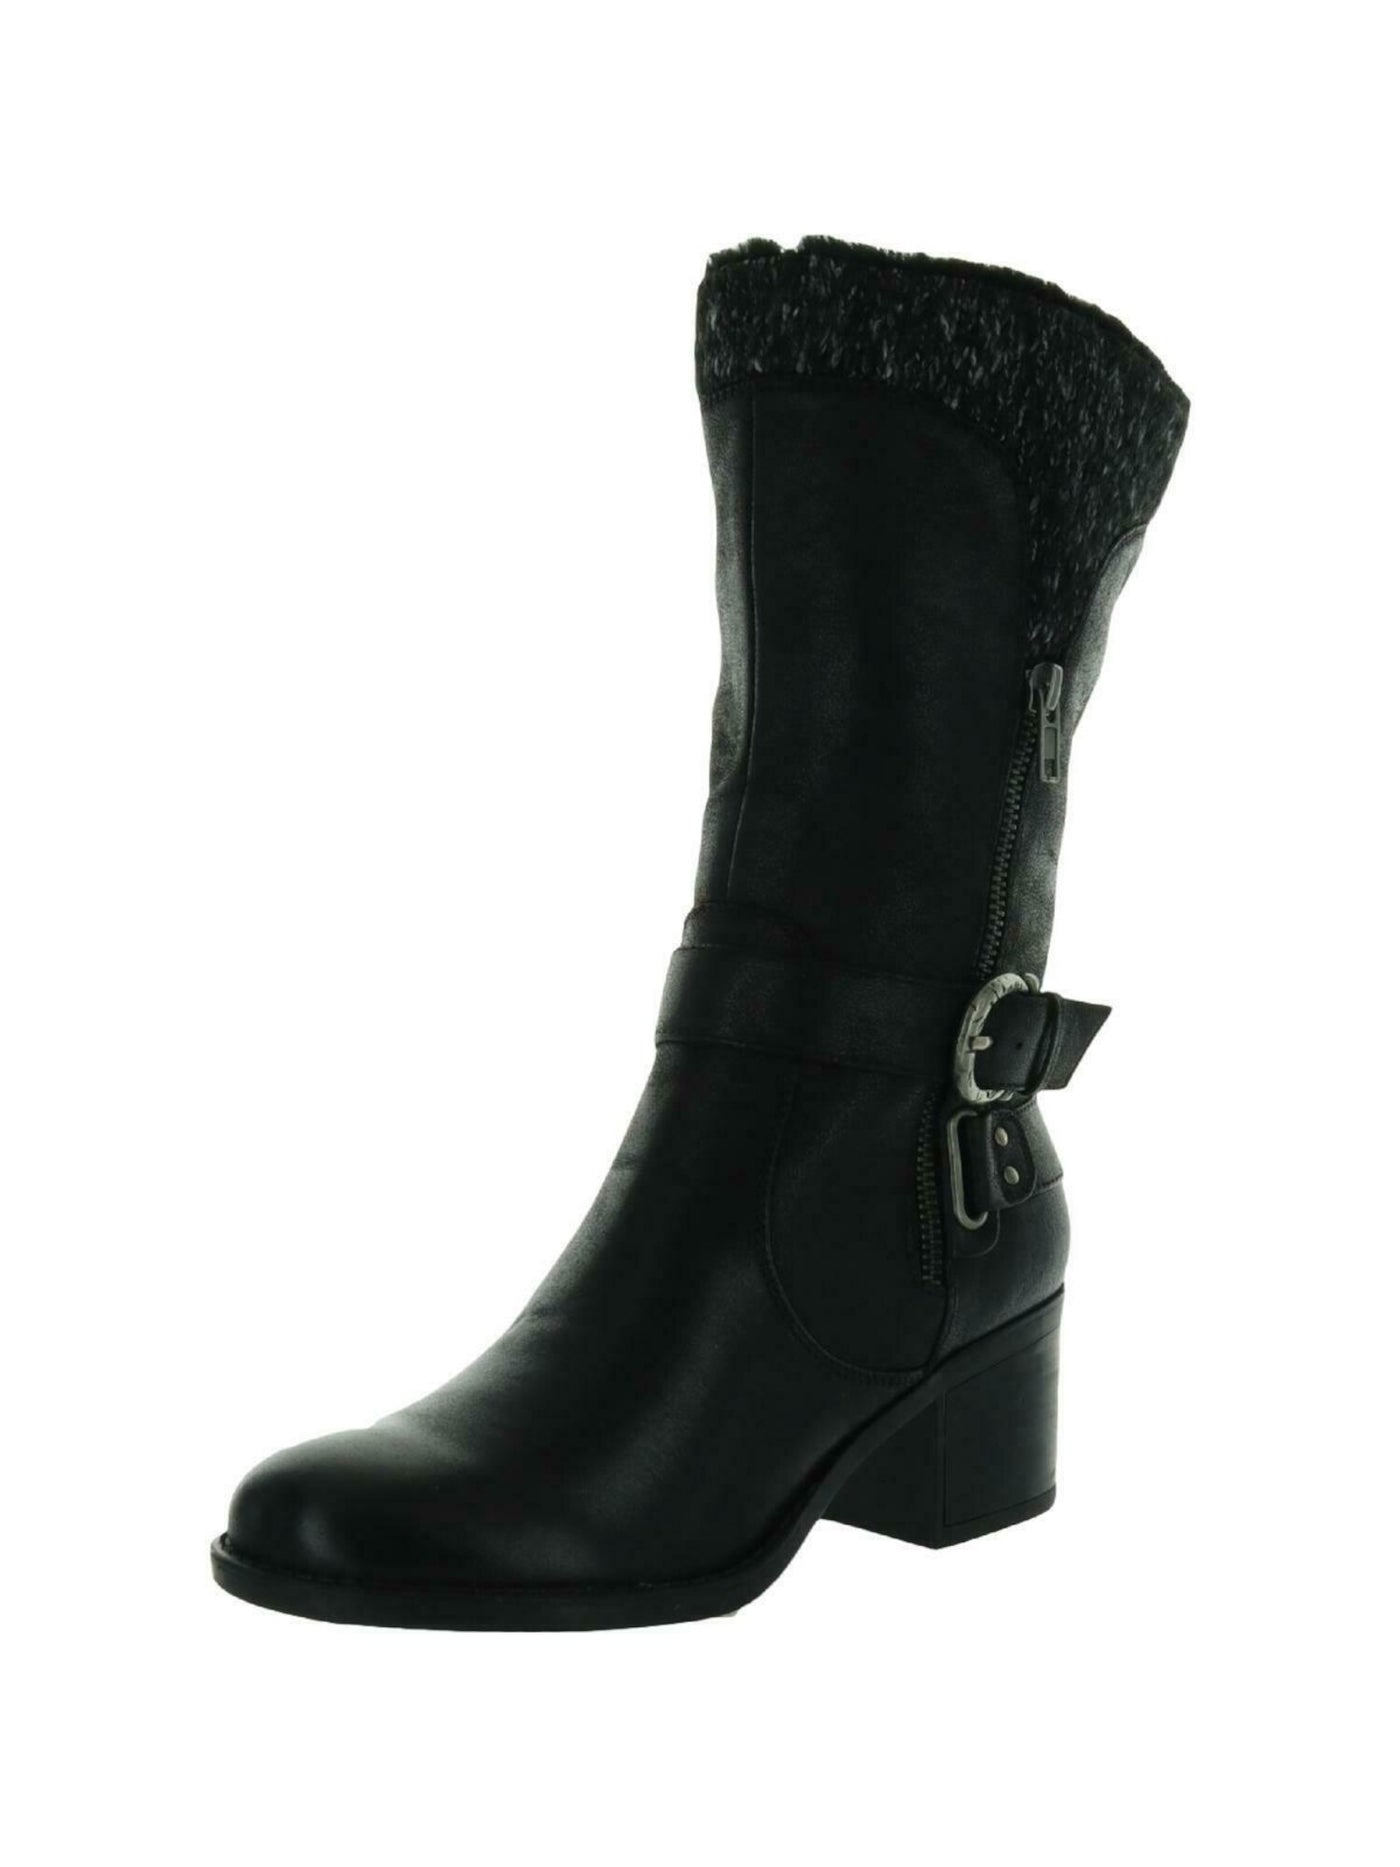 BARETRAPS Womens Black Zipper Accent Cushioned Buckle Accent Willow Round Toe Stacked Heel Zip-Up Heeled Boots 9.5